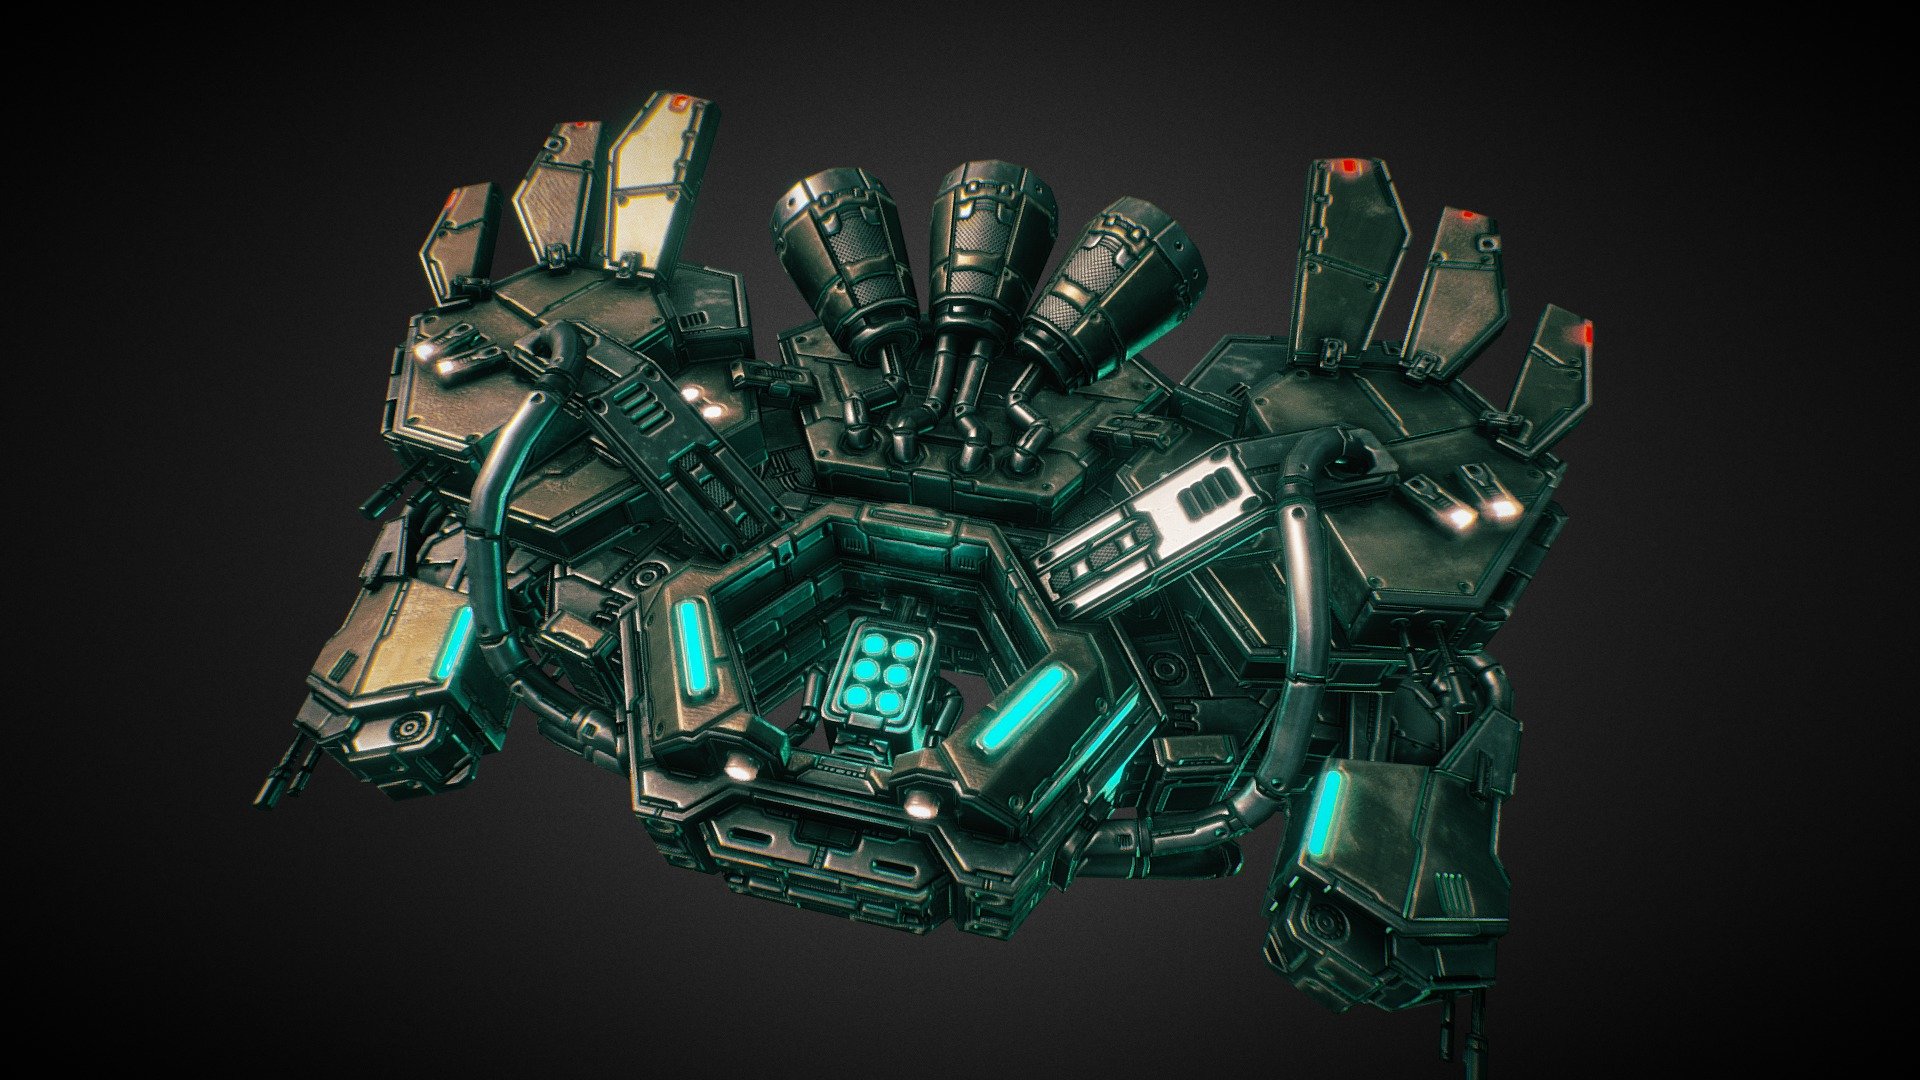 In-game model of a medium spaceship belonging to the Deprived faction.
Learn more about the game at http://starfalltactics.com/ - Starfall Tactics — Newton Deprived battlecruiser - 3D model by Snowforged Entertainment (@snowforged) 3d model